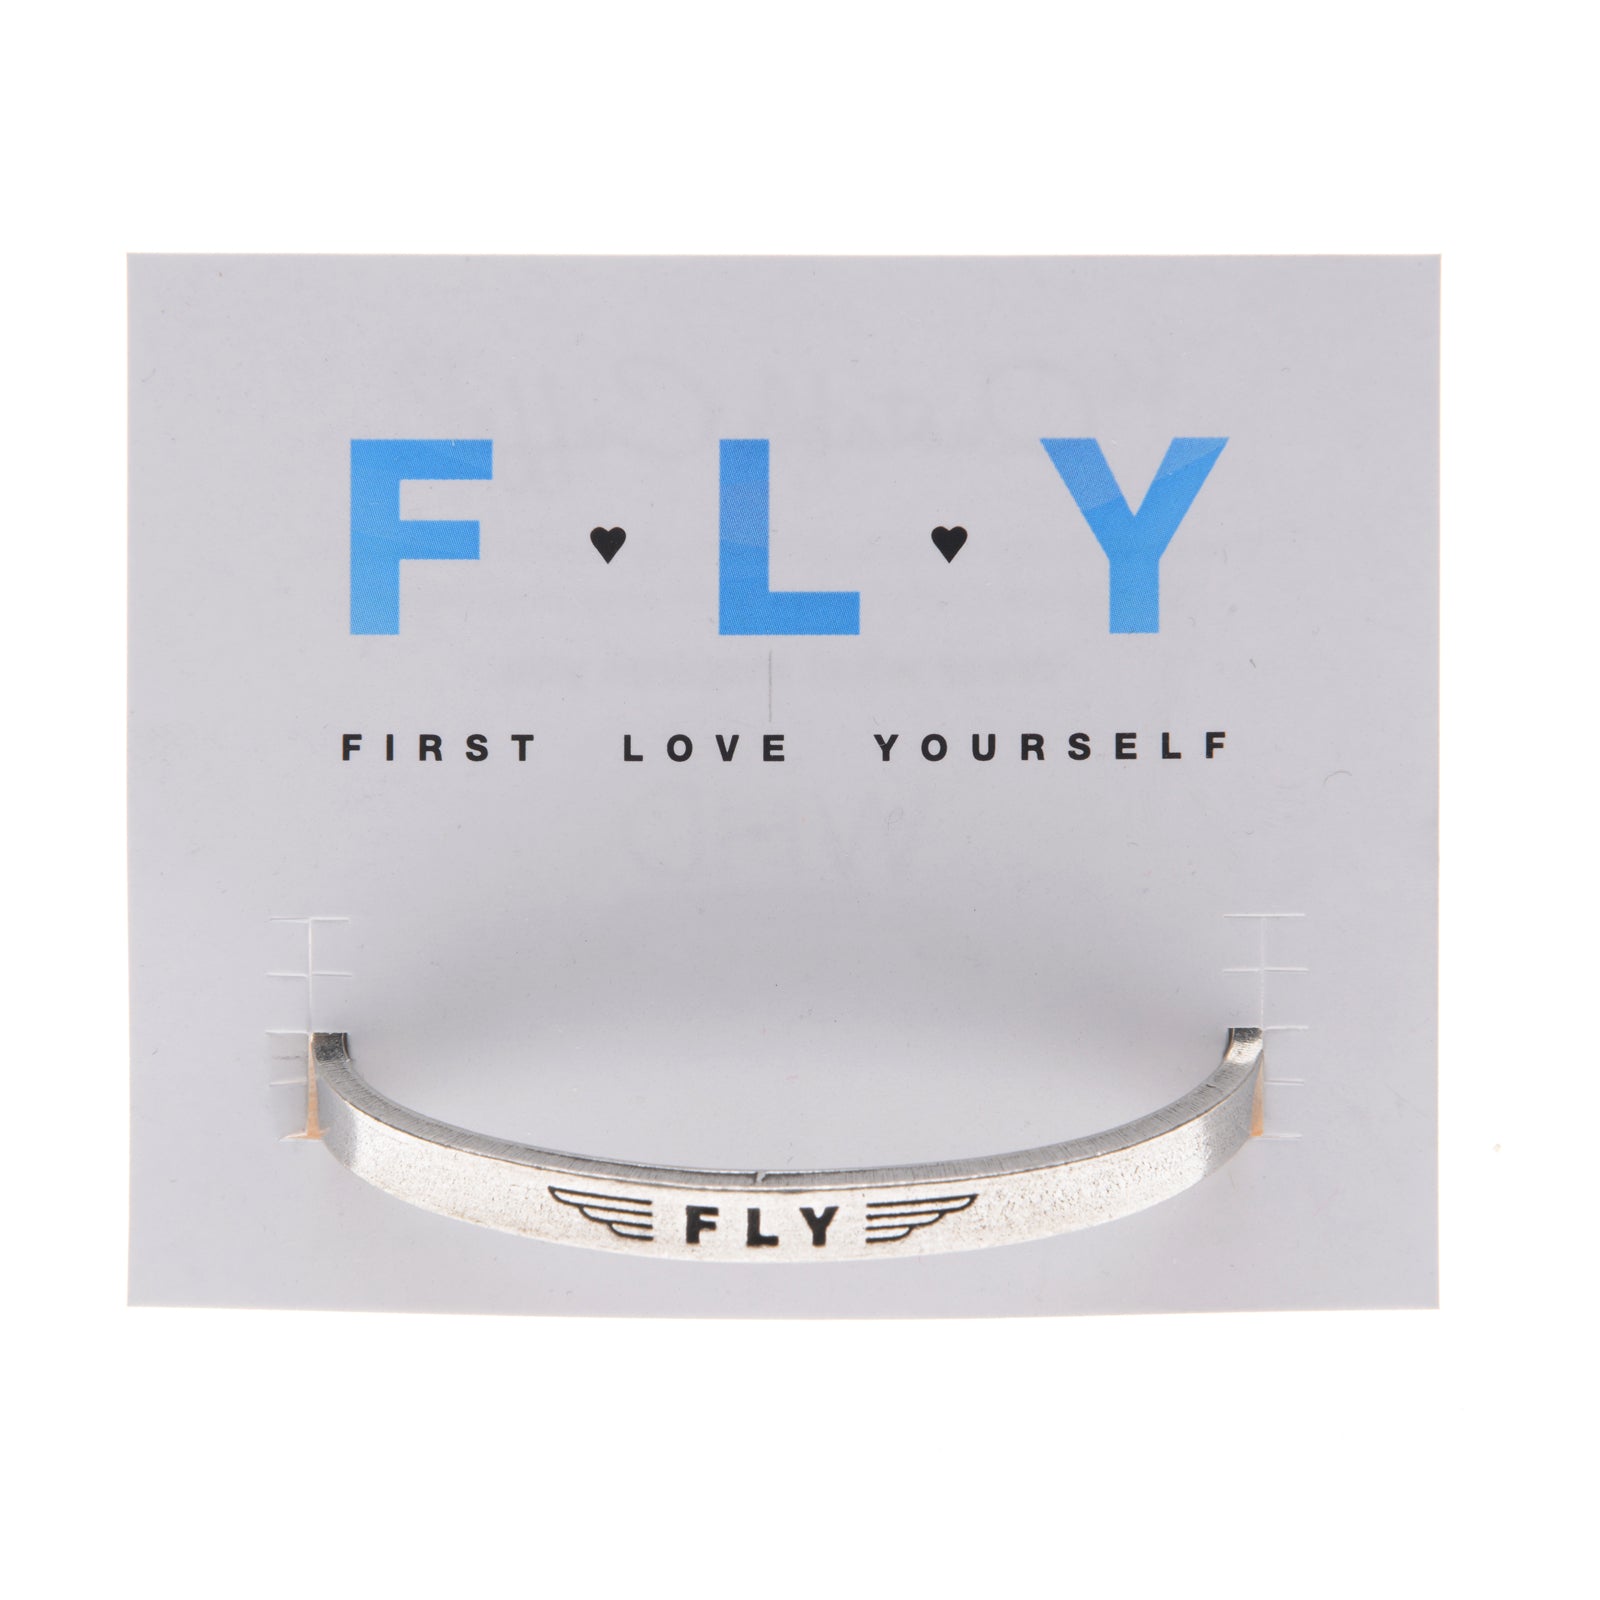 FLY (inside - First Love Yourself) Quotable Cuff on backer card